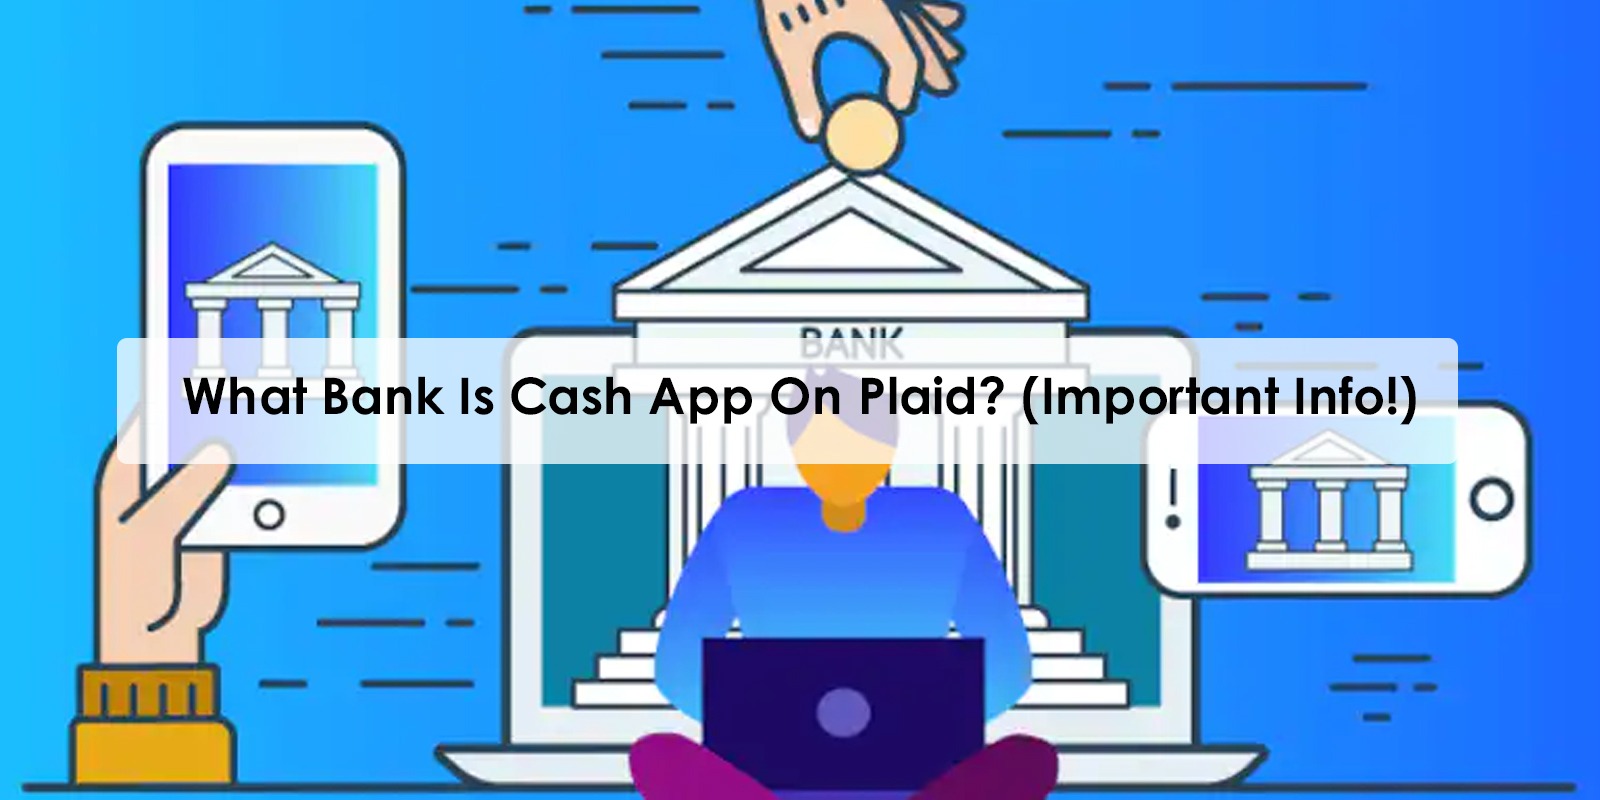 What Bank Is Cash App On Plaid? (Important Info!)